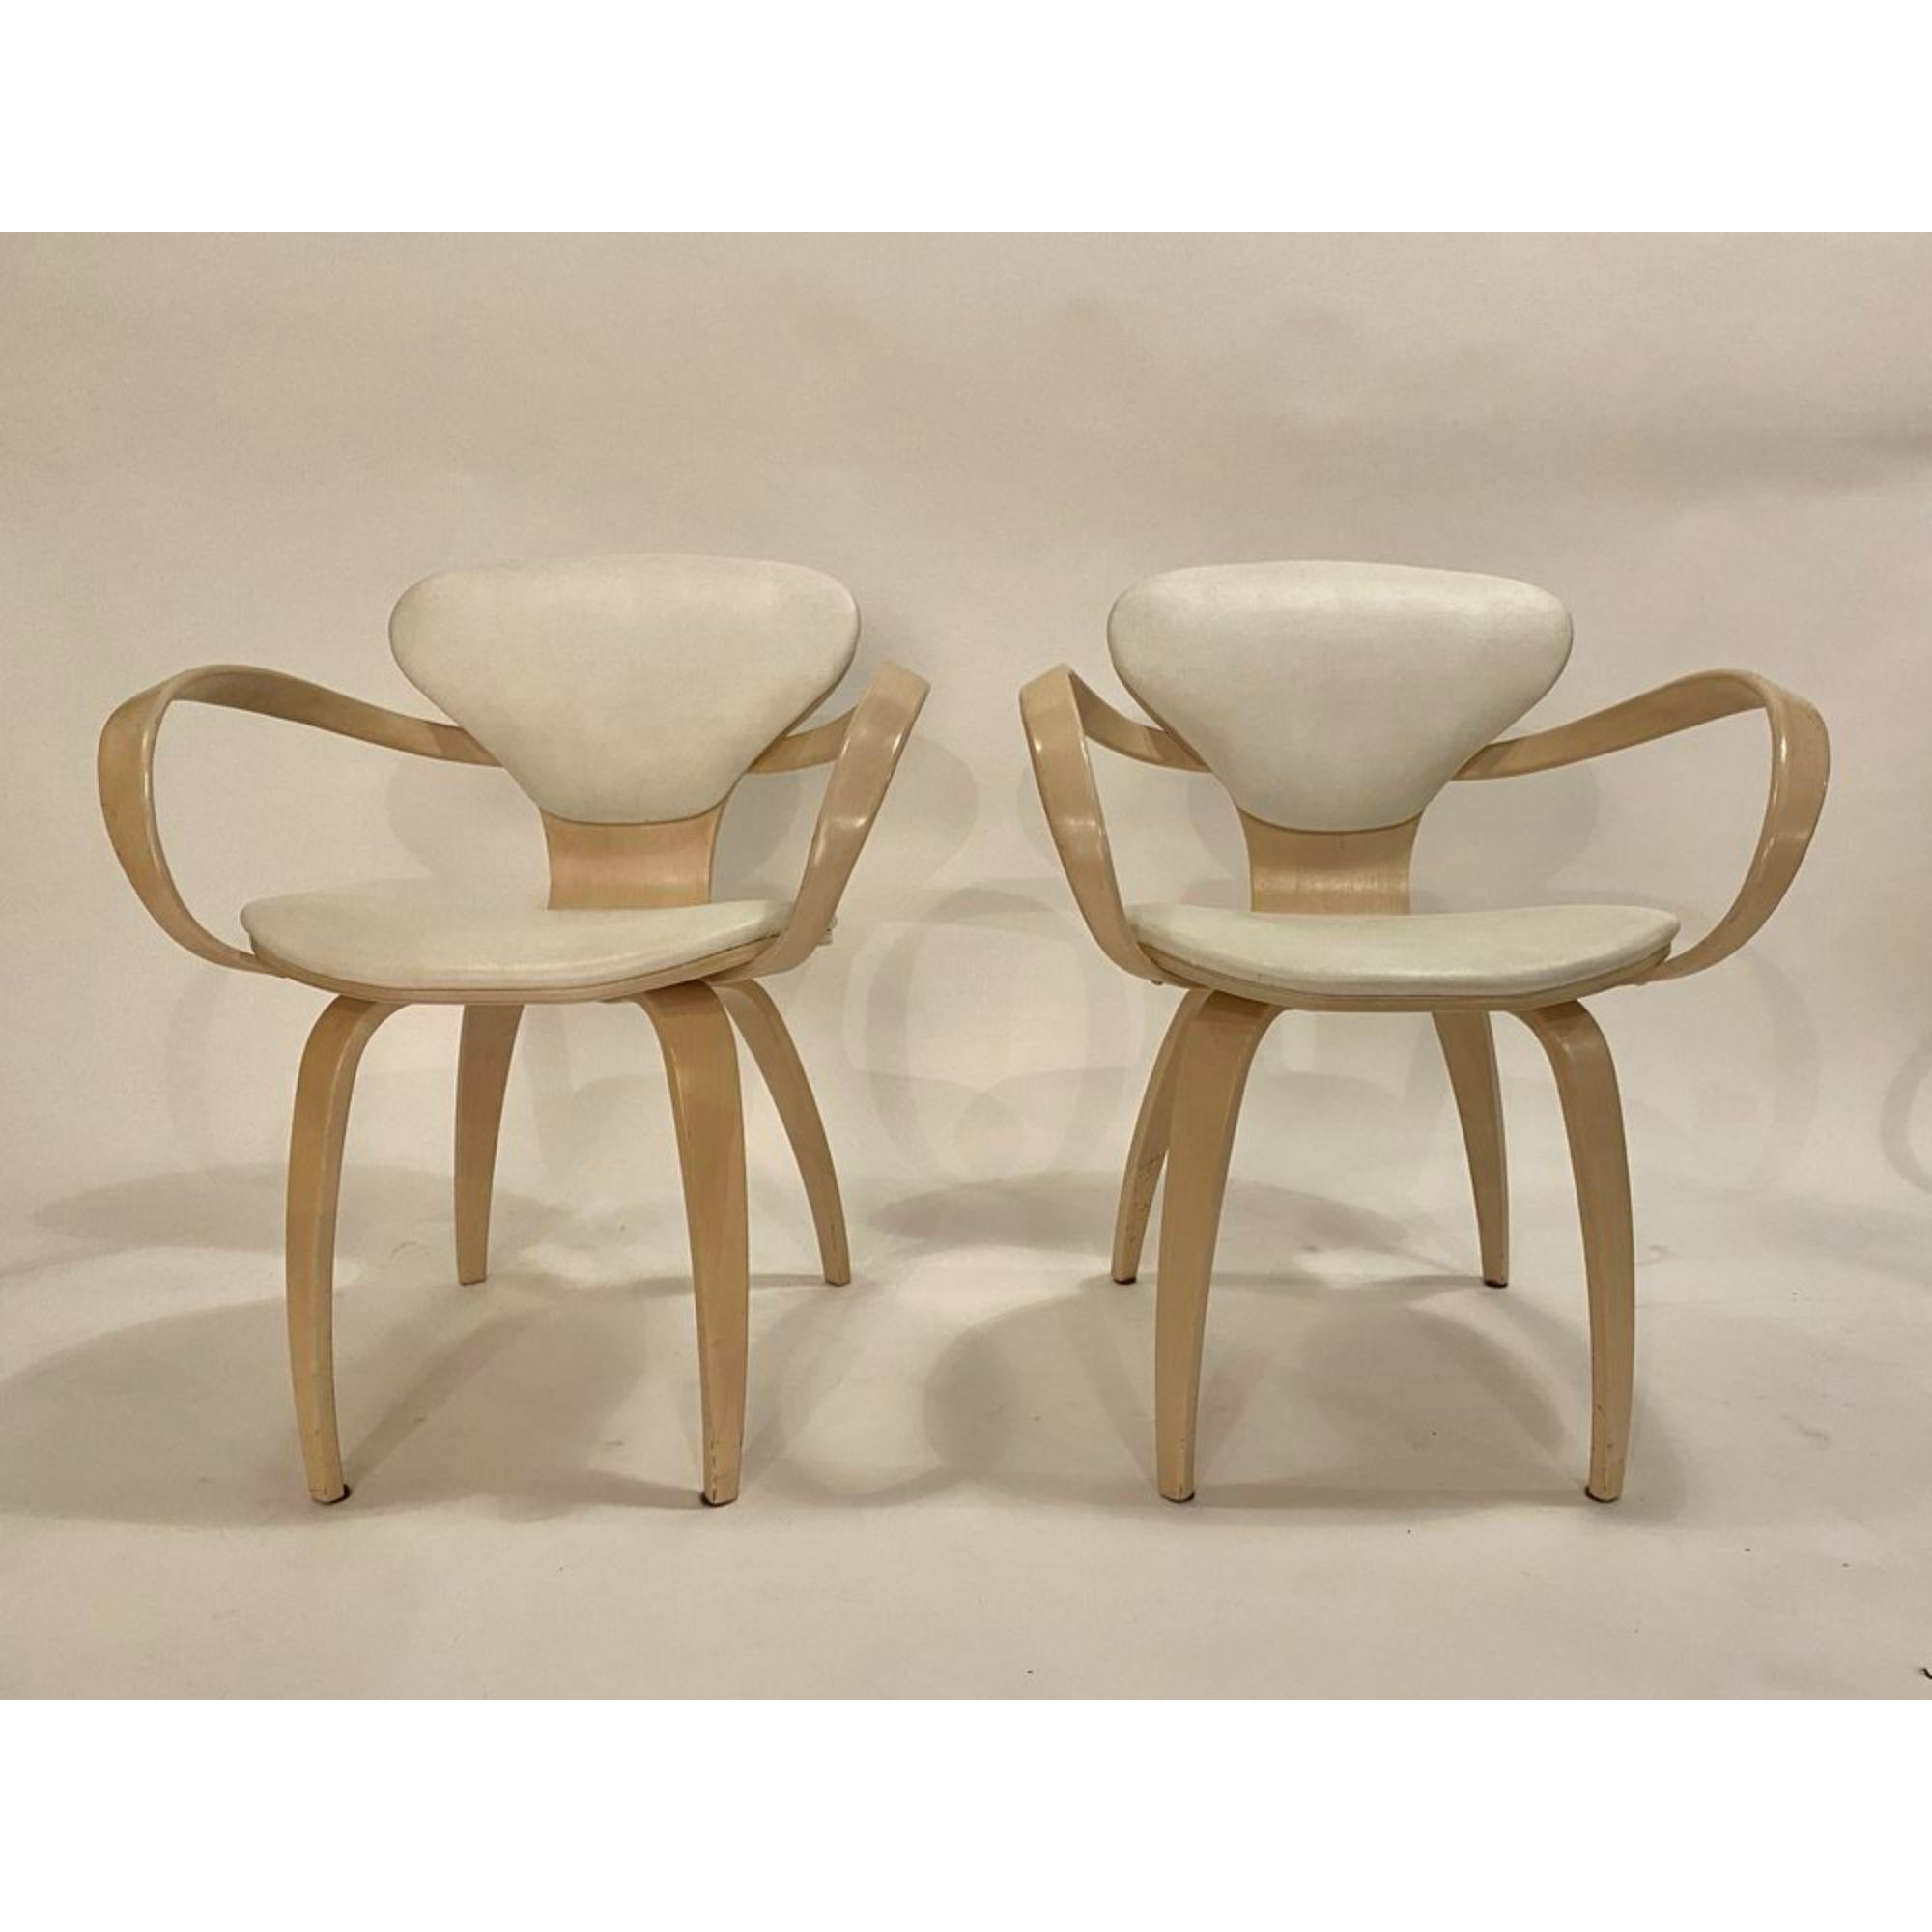 Pretzel arm chairs by Norman Cherner for Plycraft in bleached white wood and ivory faux leather. Good original condition.


